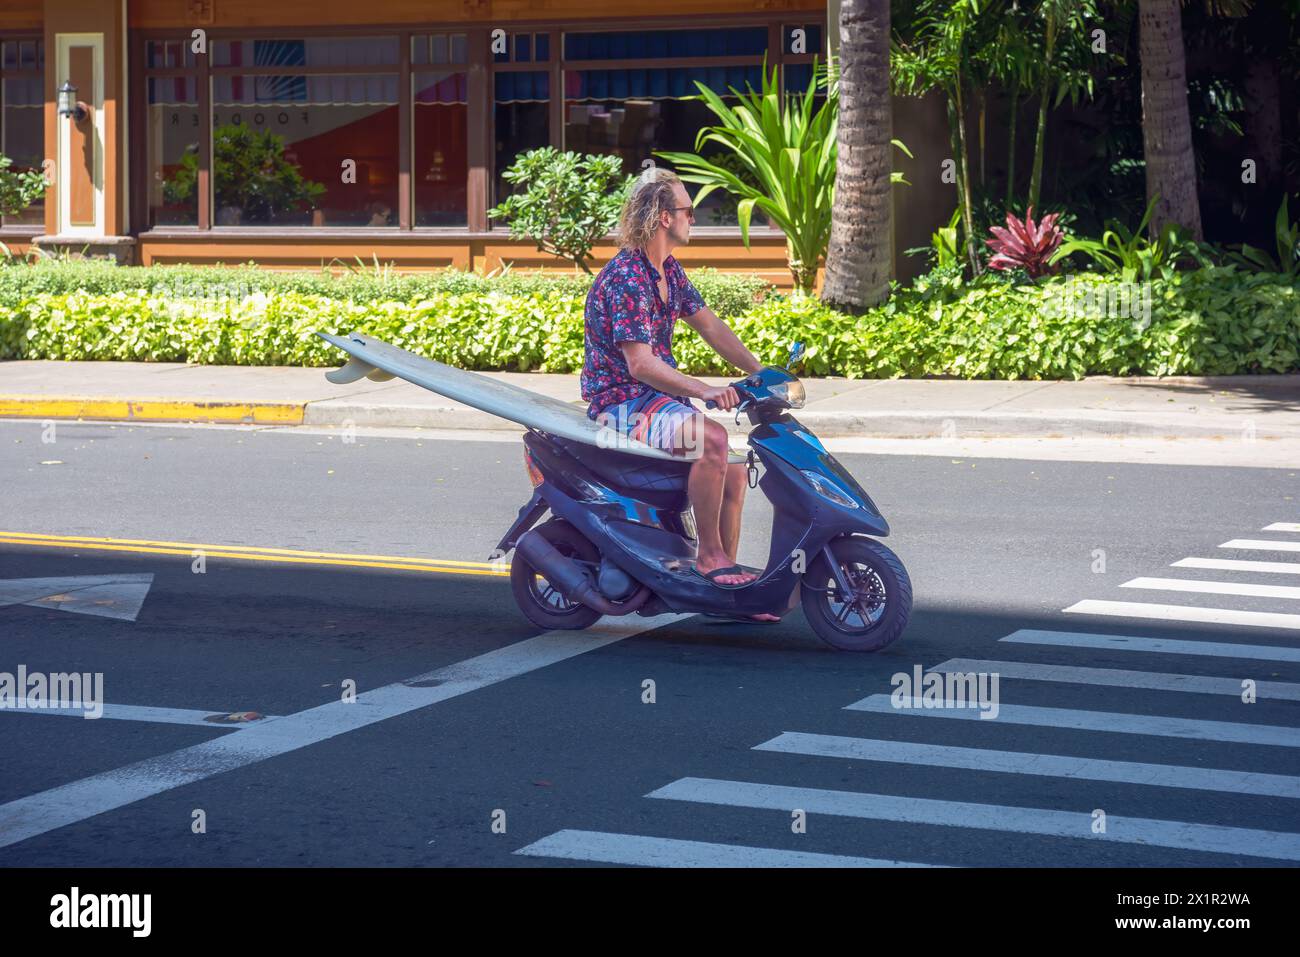 'Waikiki's Unique Commute: On October 7, 2016, a surfer effortlessly transports their surfboard by skillfully sitting on it while riding a scooter' Stock Photo